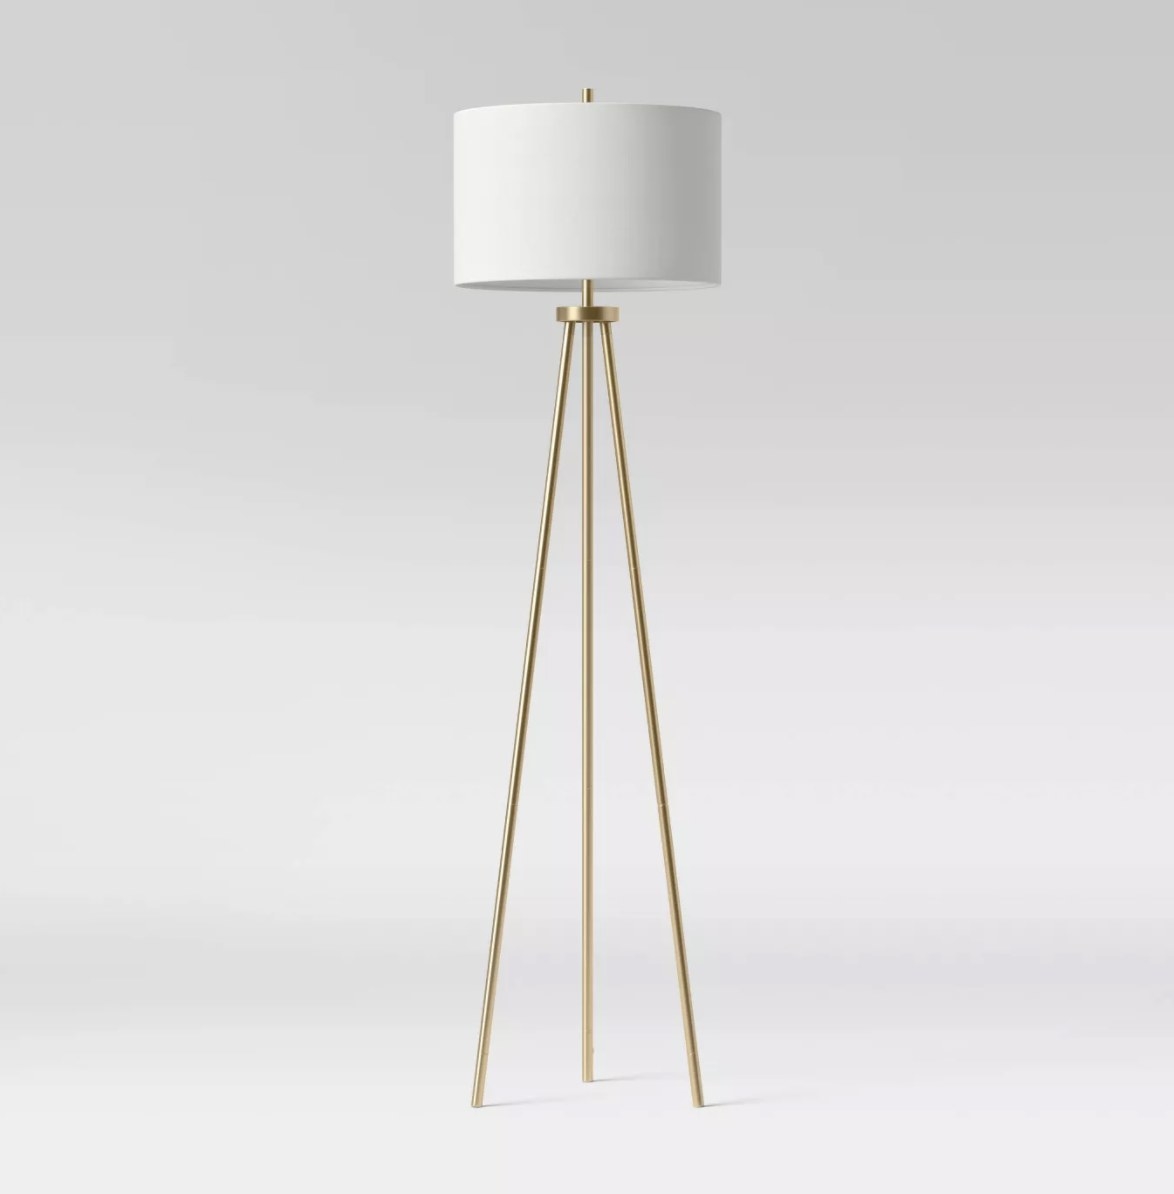 The white lamp has a crisp cylindrical shade and three long gold legs